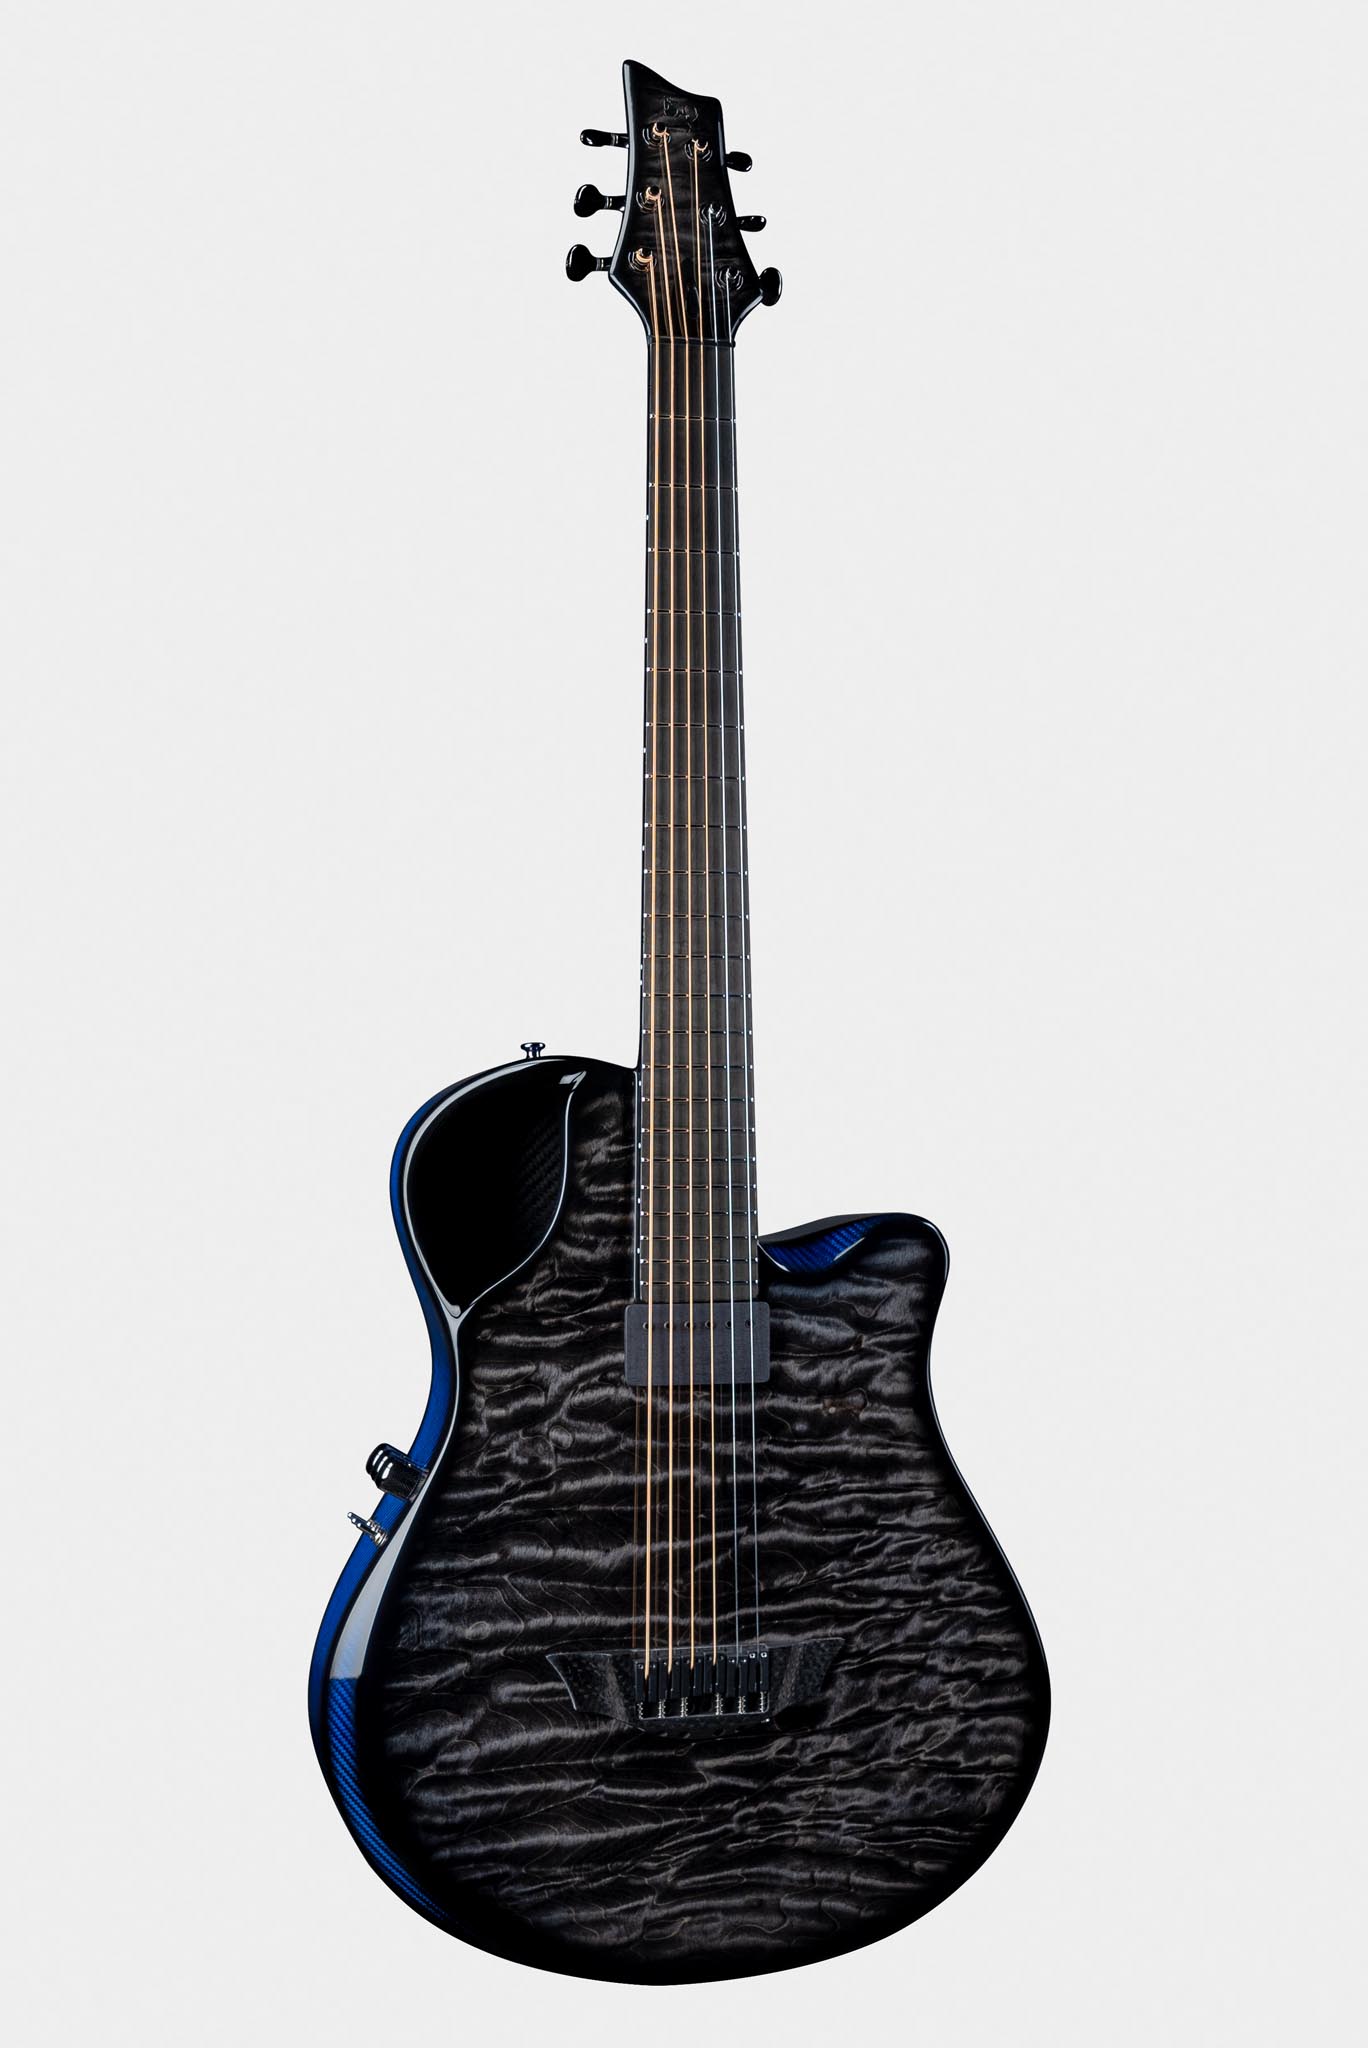 Emerald X7 guitar in blue and black finish with unique pattern